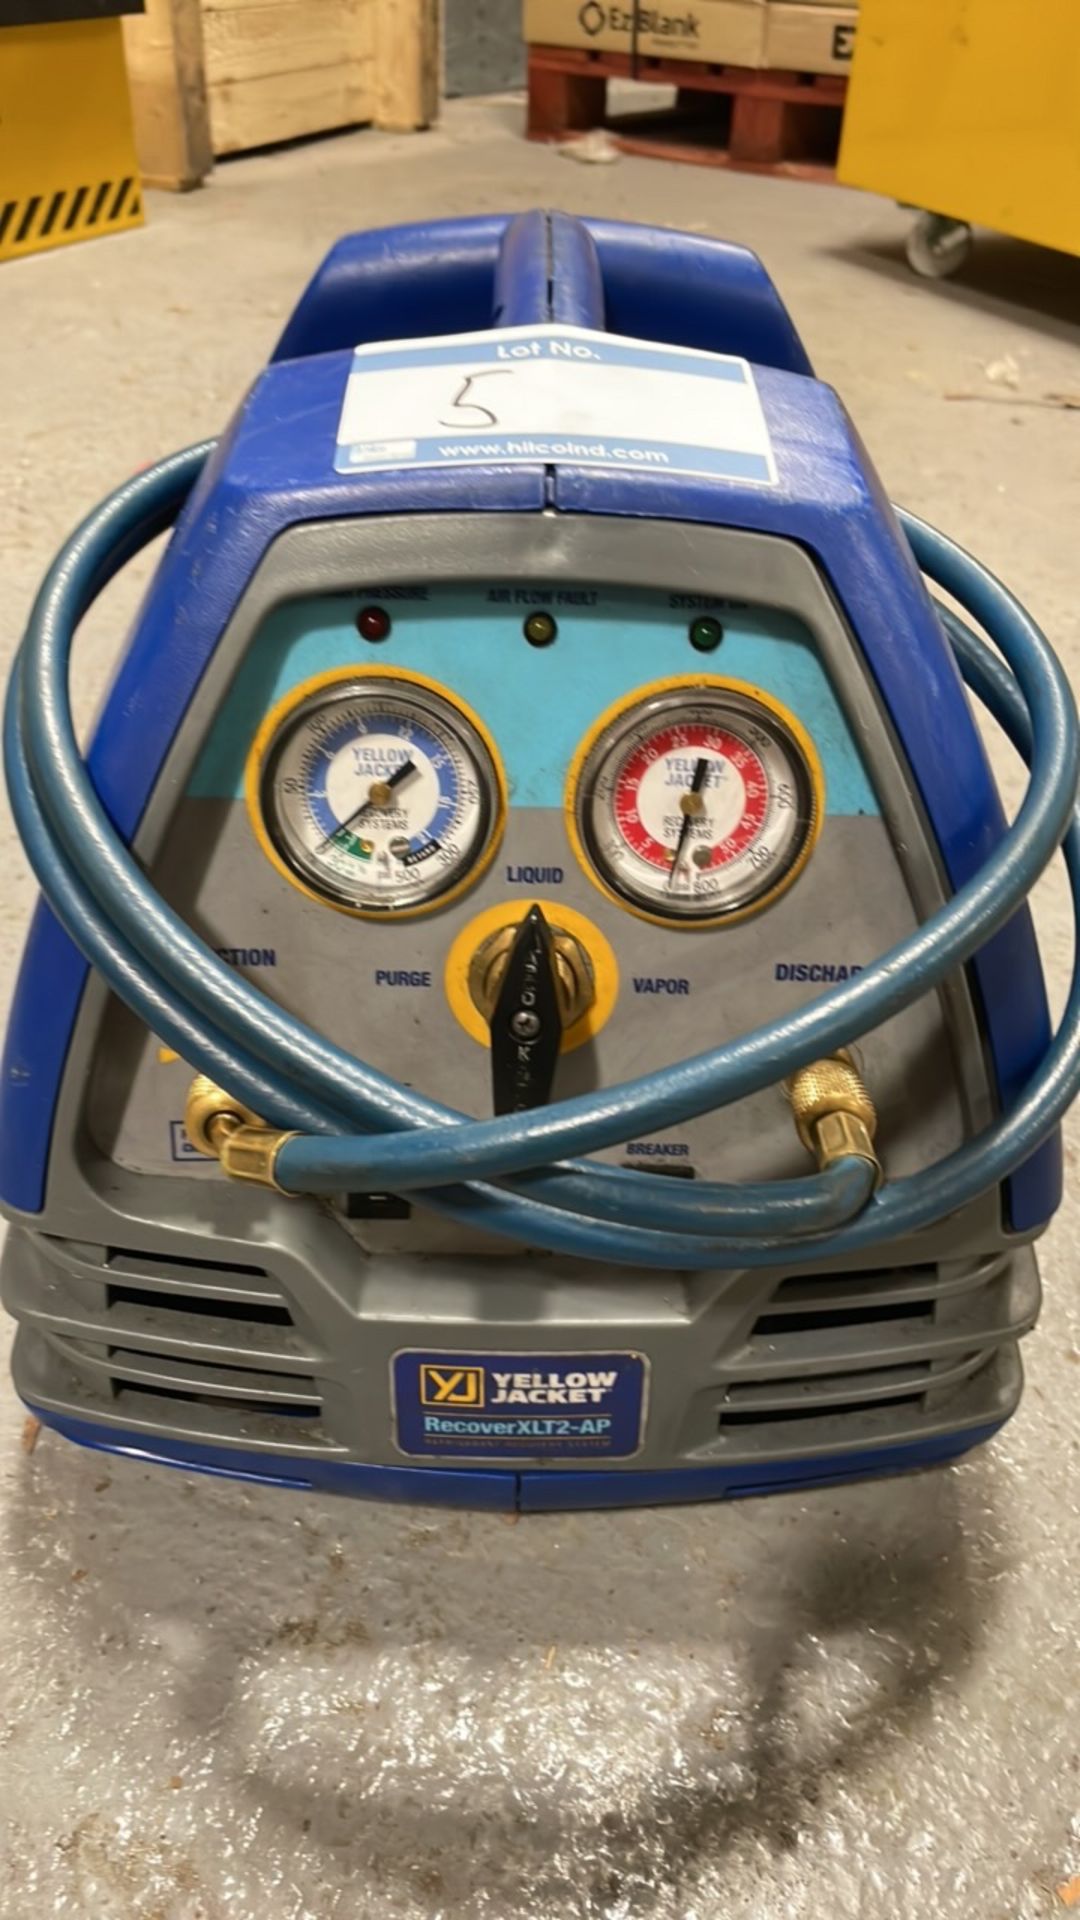 Yellow Jacket RecoverXLT Refrigerant Recovery Unit - Image 3 of 6